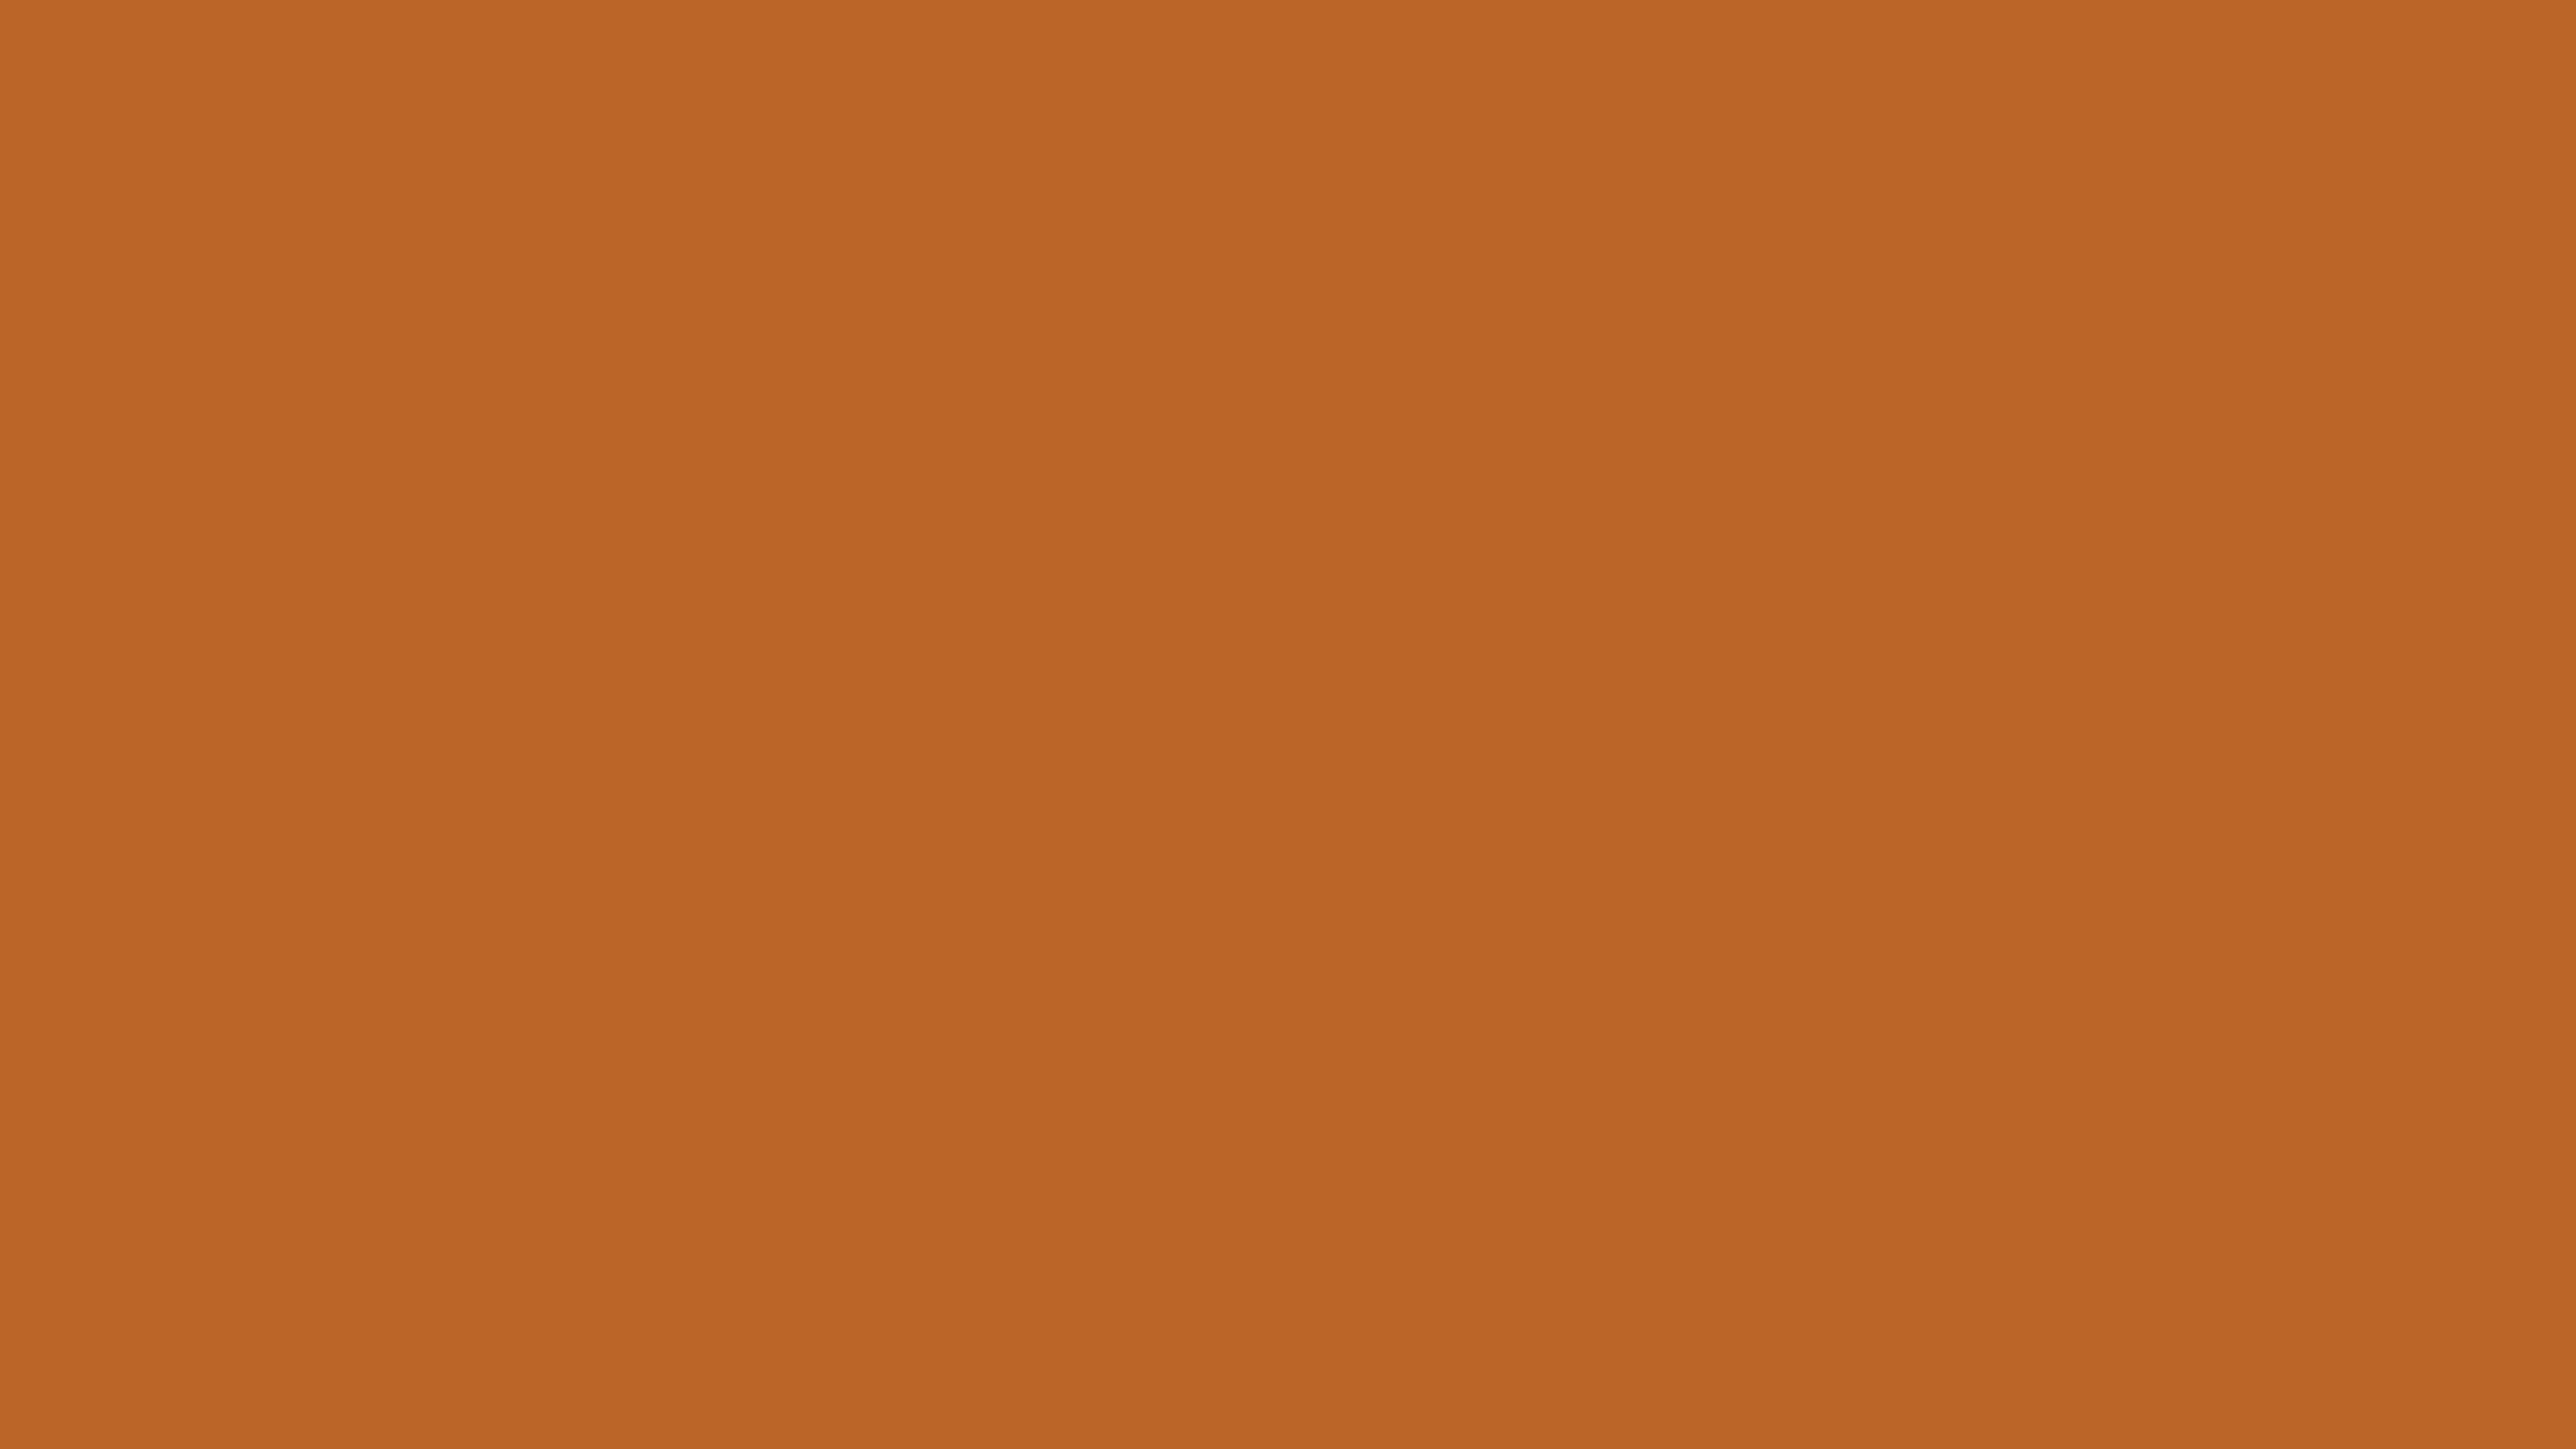 4096x2304 Ruddy Brown Solid Color Background